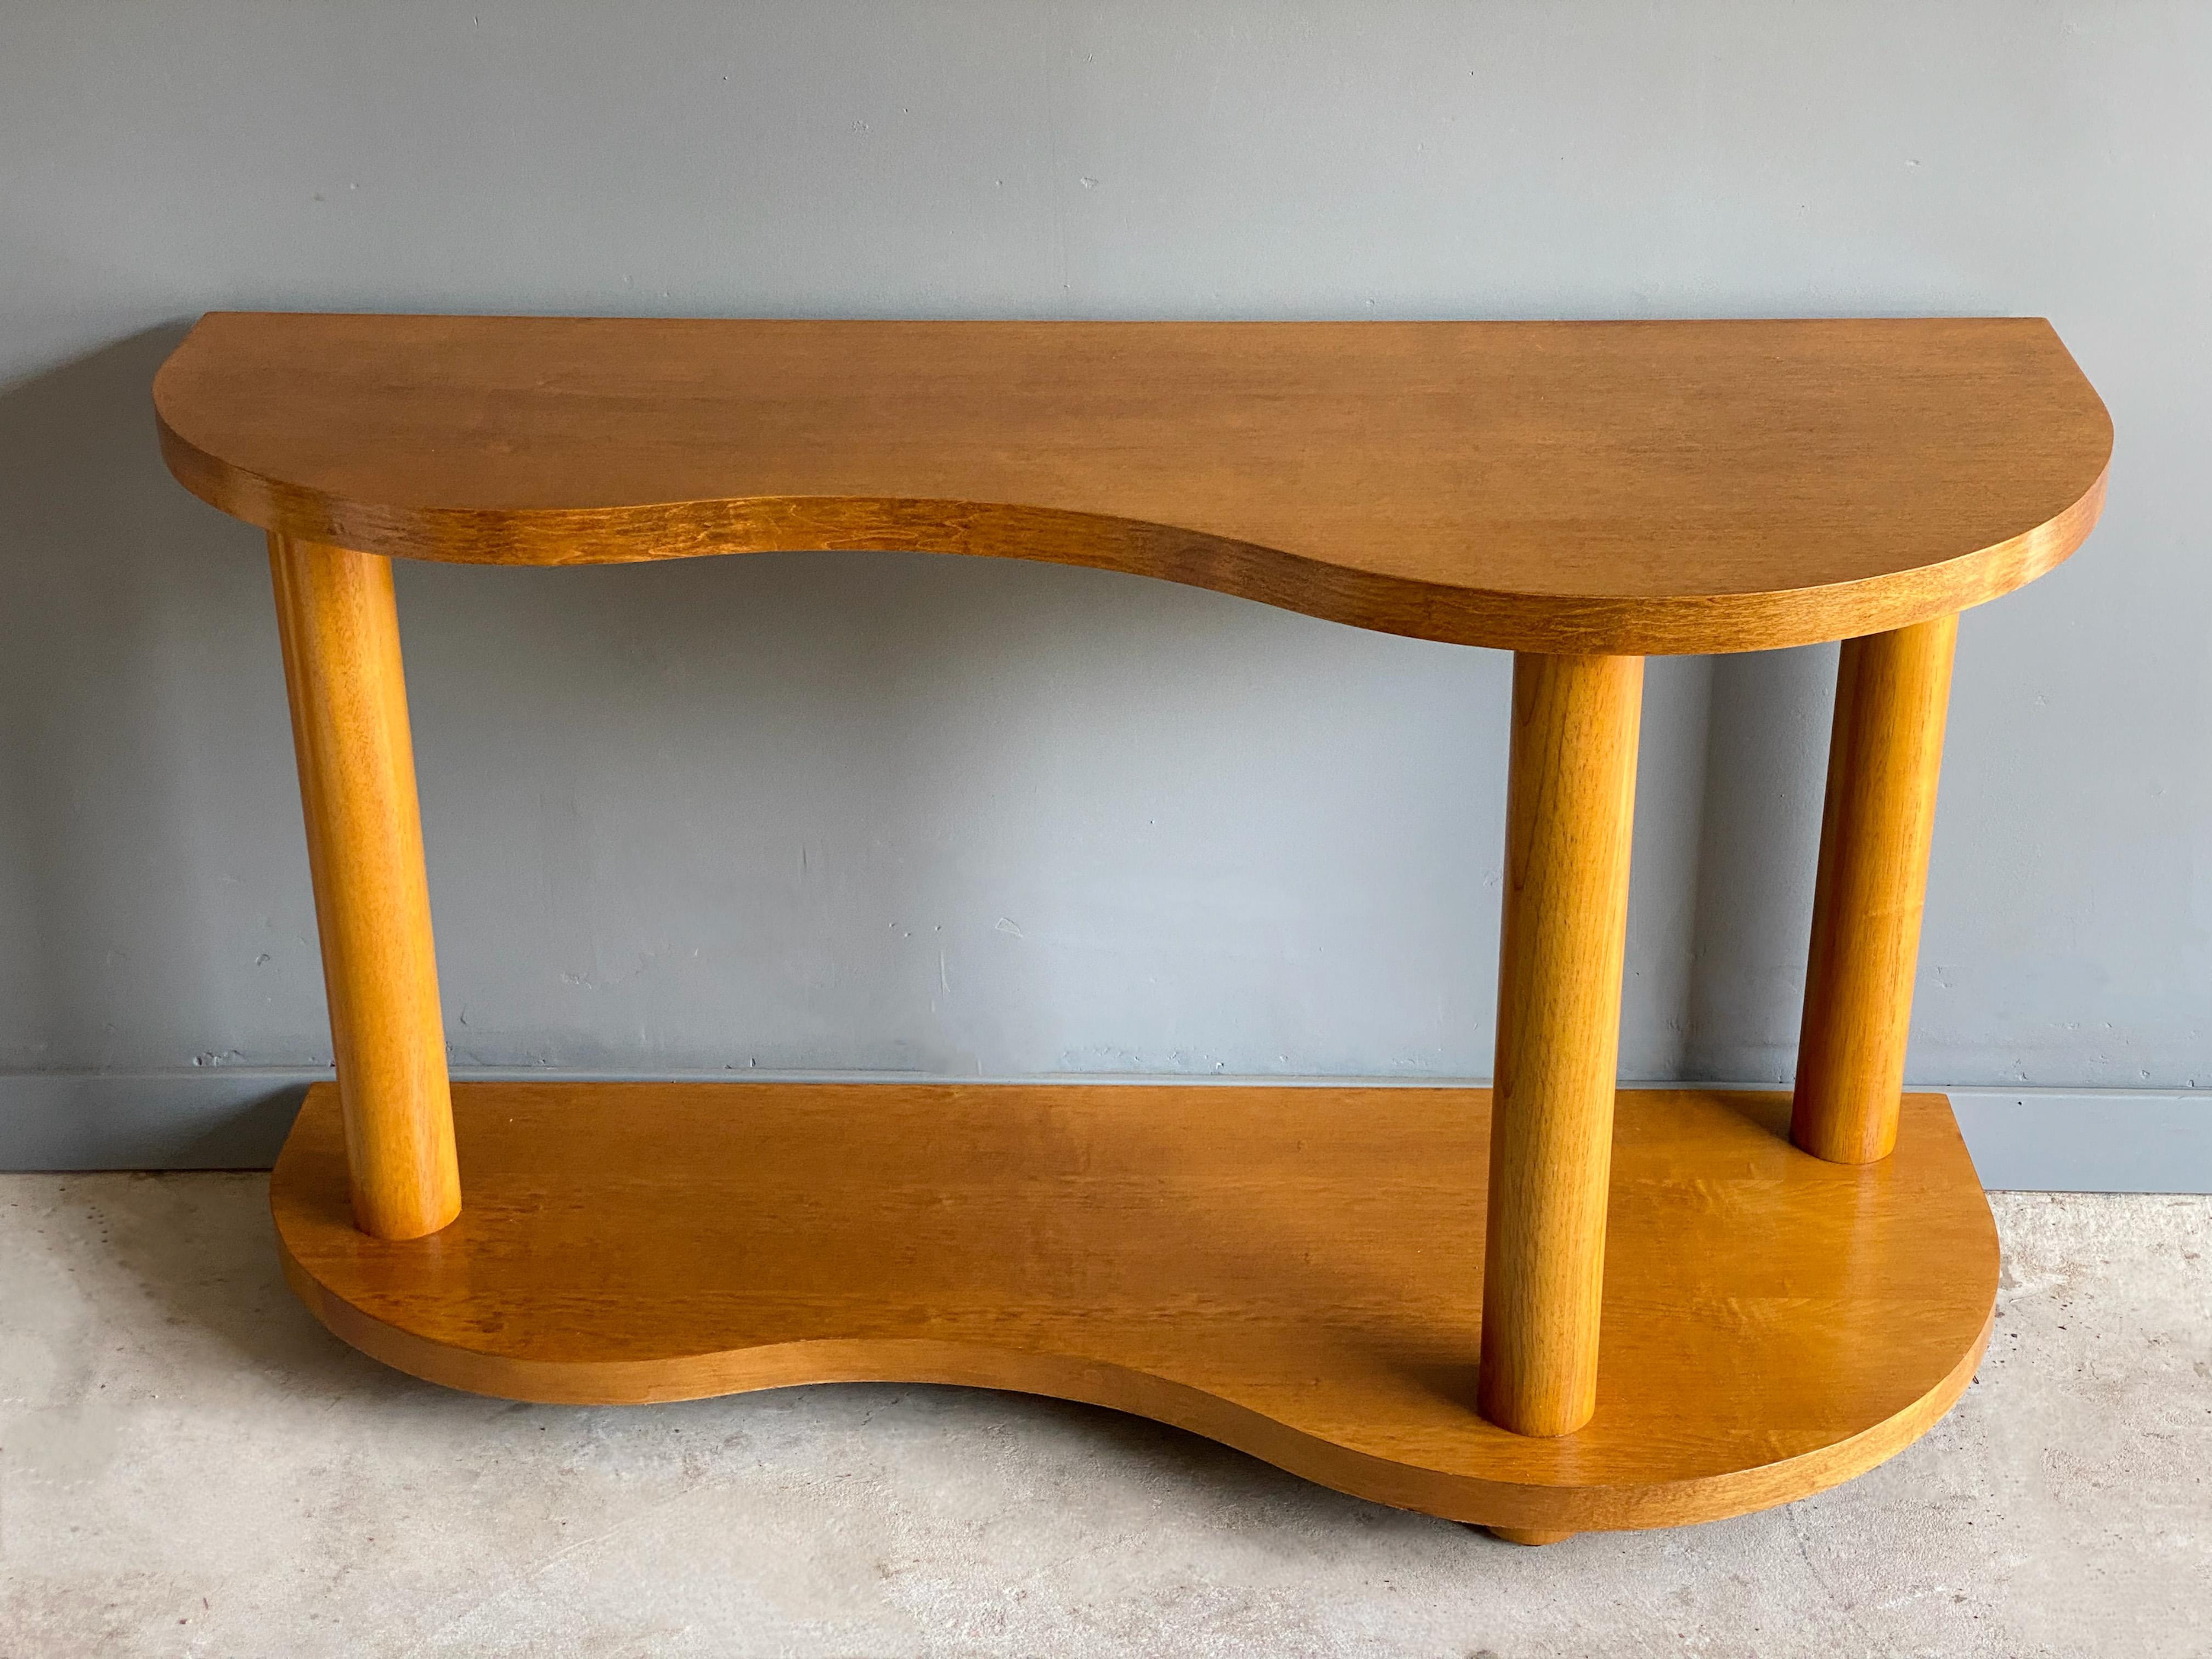 Organic form mid century console or sofa table in the style of Gilbert Rohde. Circa 1960s. Constructed of free form wood top with three round pillars - giving the design and architectural aesthetic.